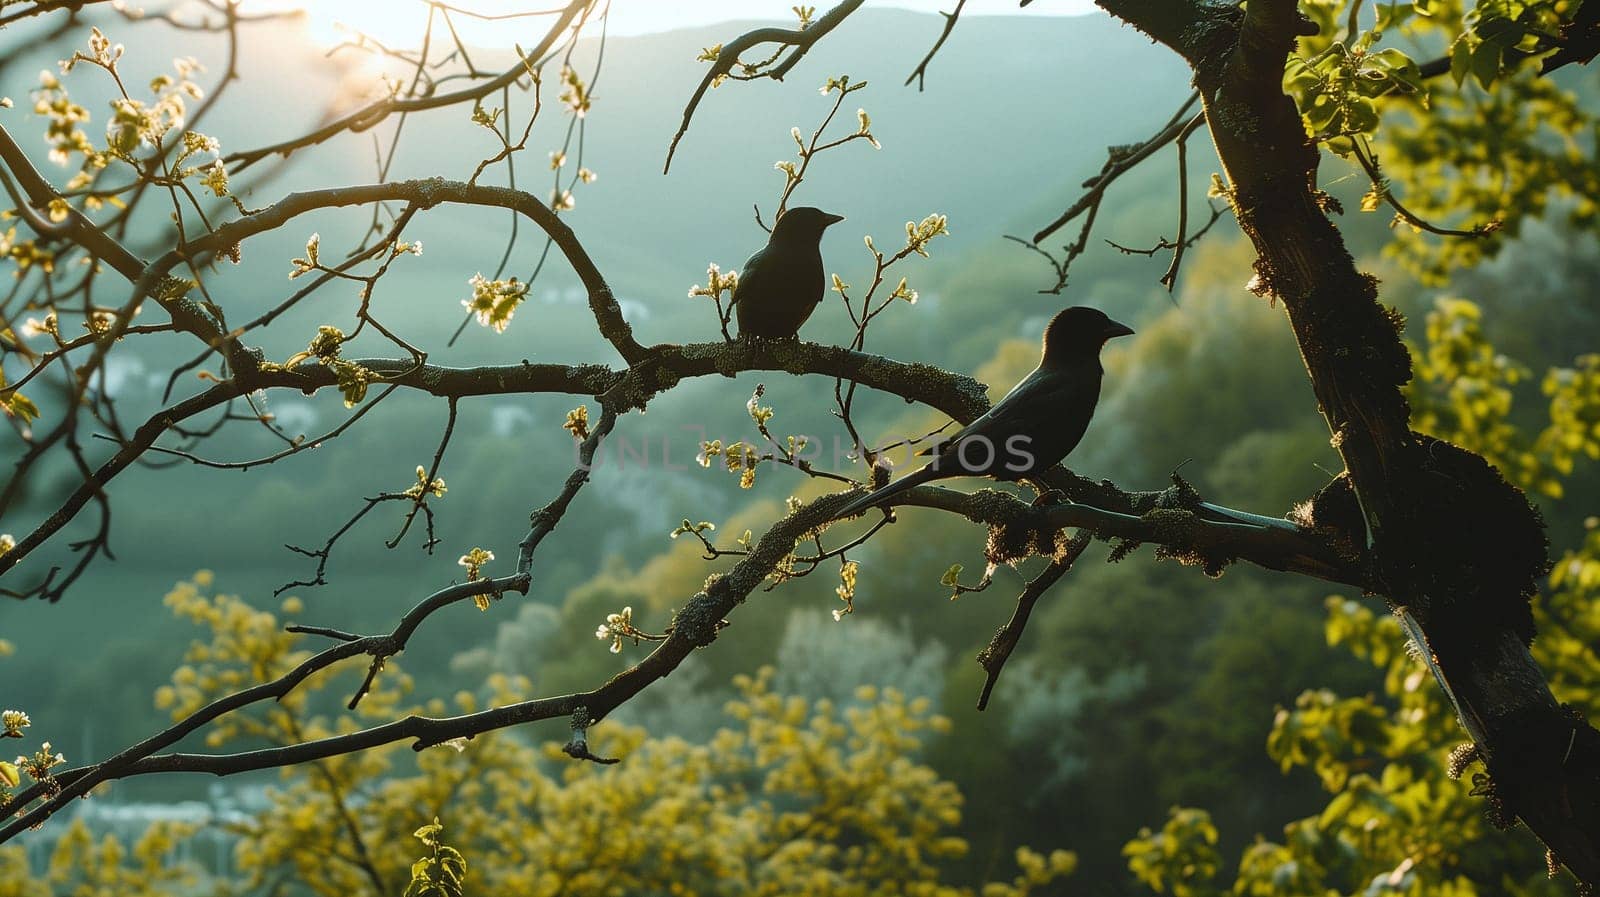 Birds are sitting on the branches of trees. Mountain landscape by NeuroSky